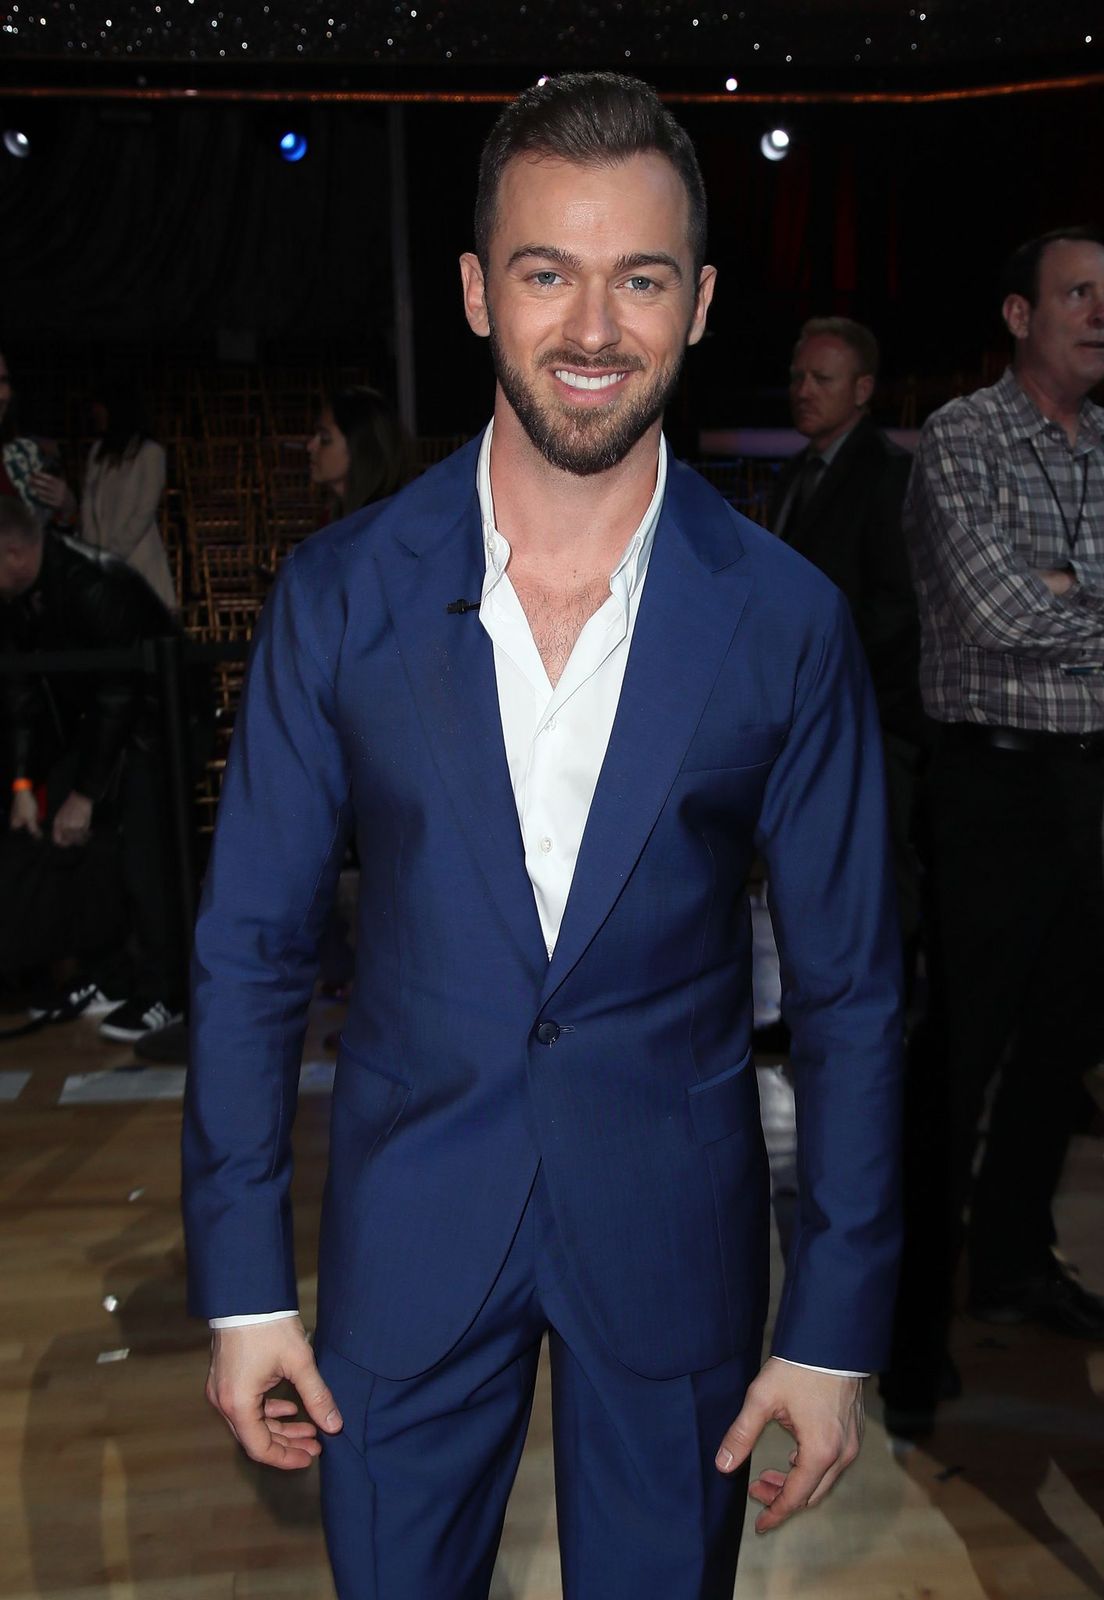 Artem Chigvintsev at "Dancing with the Stars" season 24 premiere at CBS Television City on March 20, 2017, in Los Angeles, California | Photo: David Livingston/Getty Images